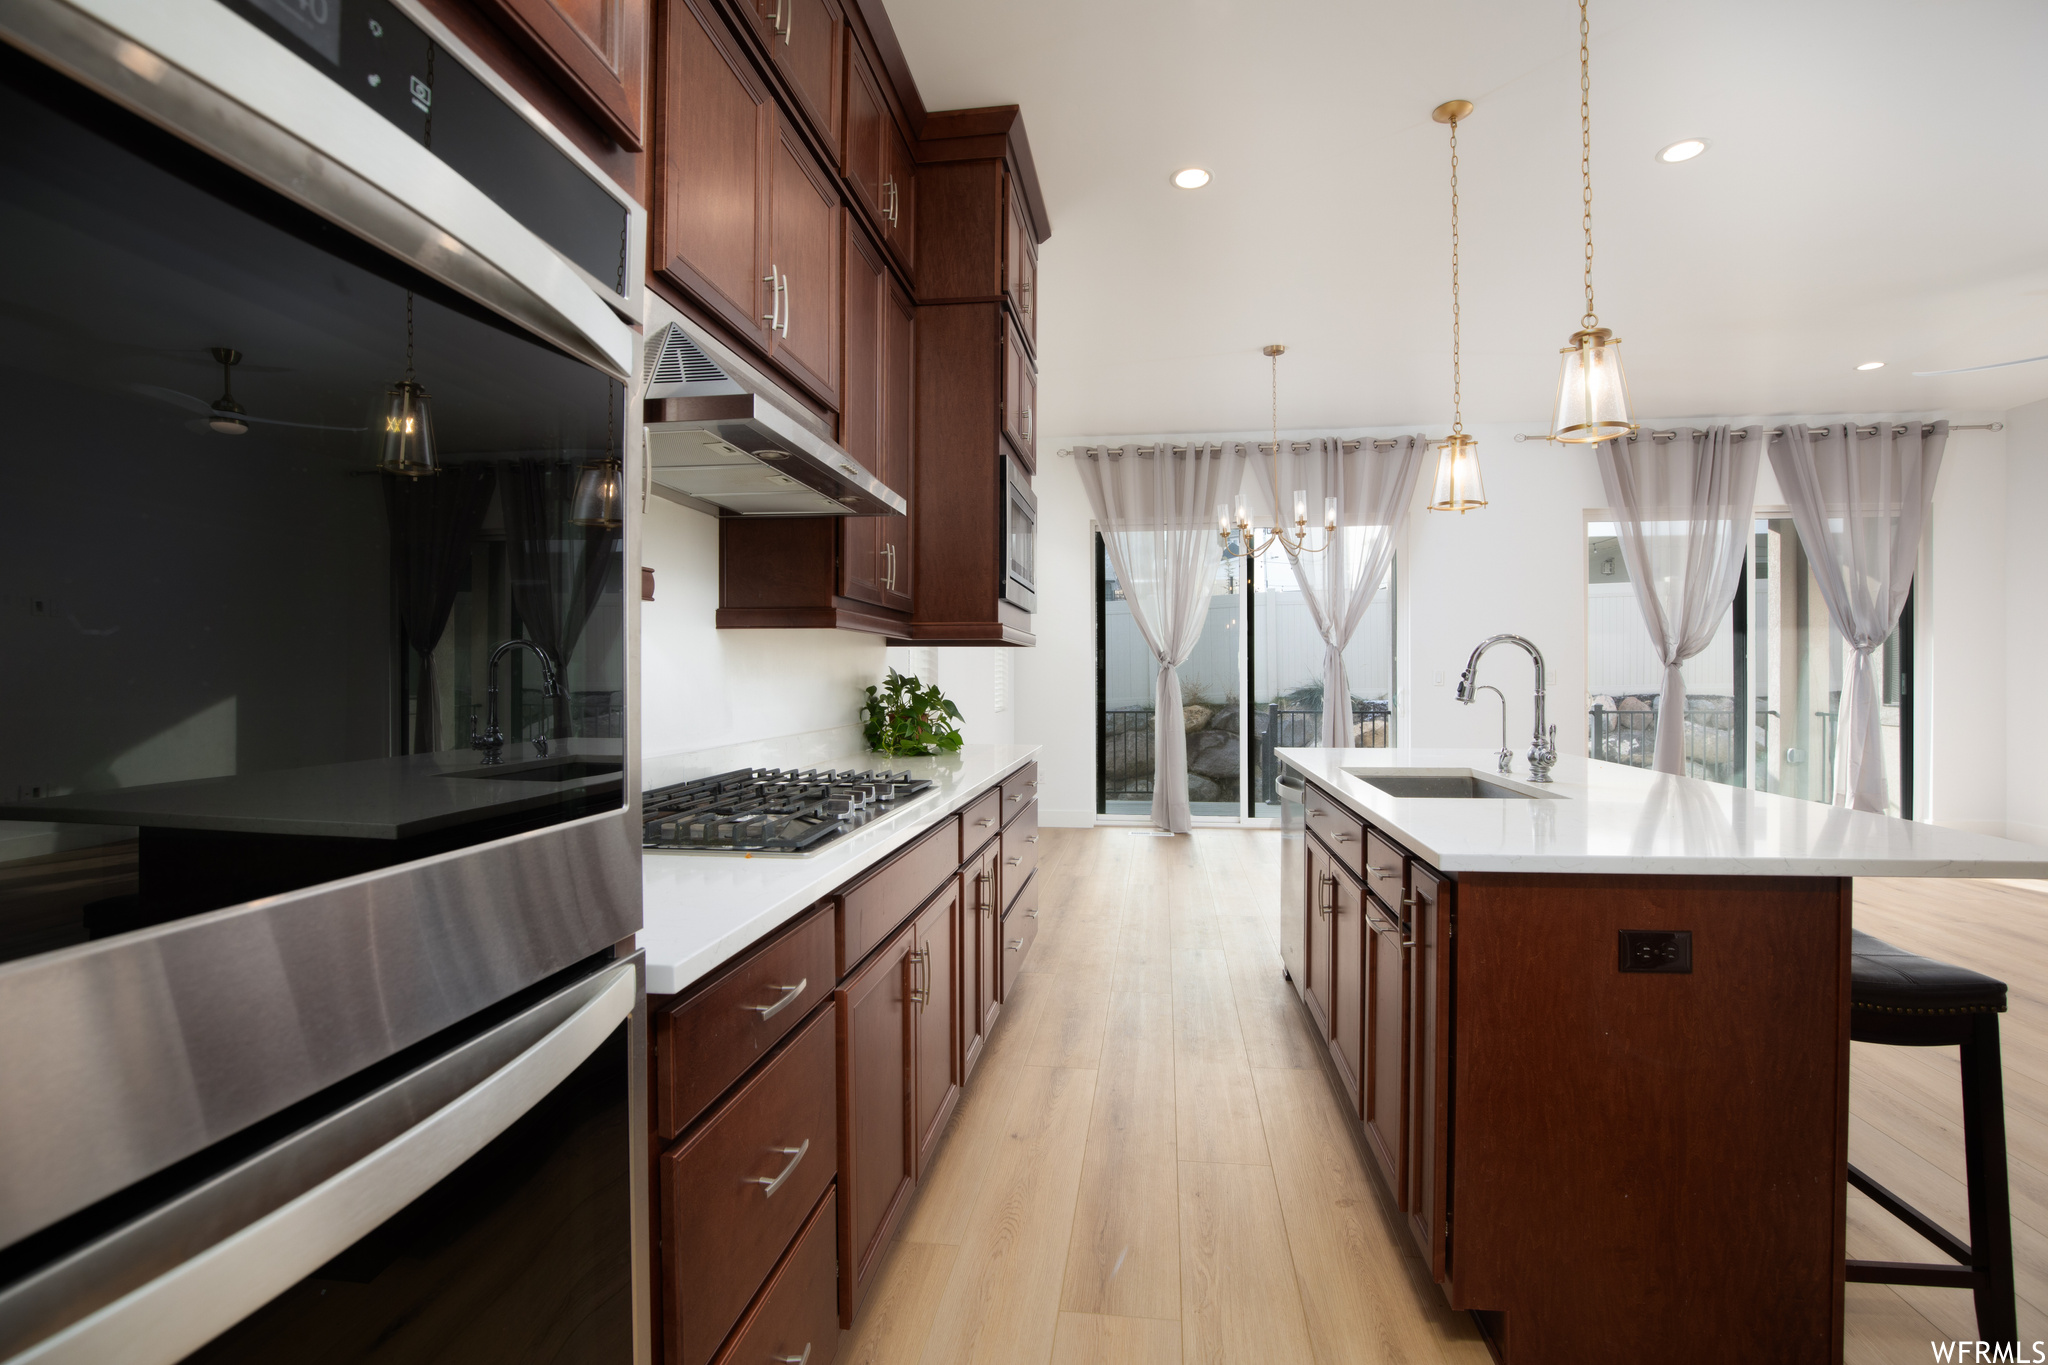 Kitchen featuring hanging light fixtures, sink, appliances with stainless steel finishes, a kitchen island with sink, and light hardwood / wood-style flooring